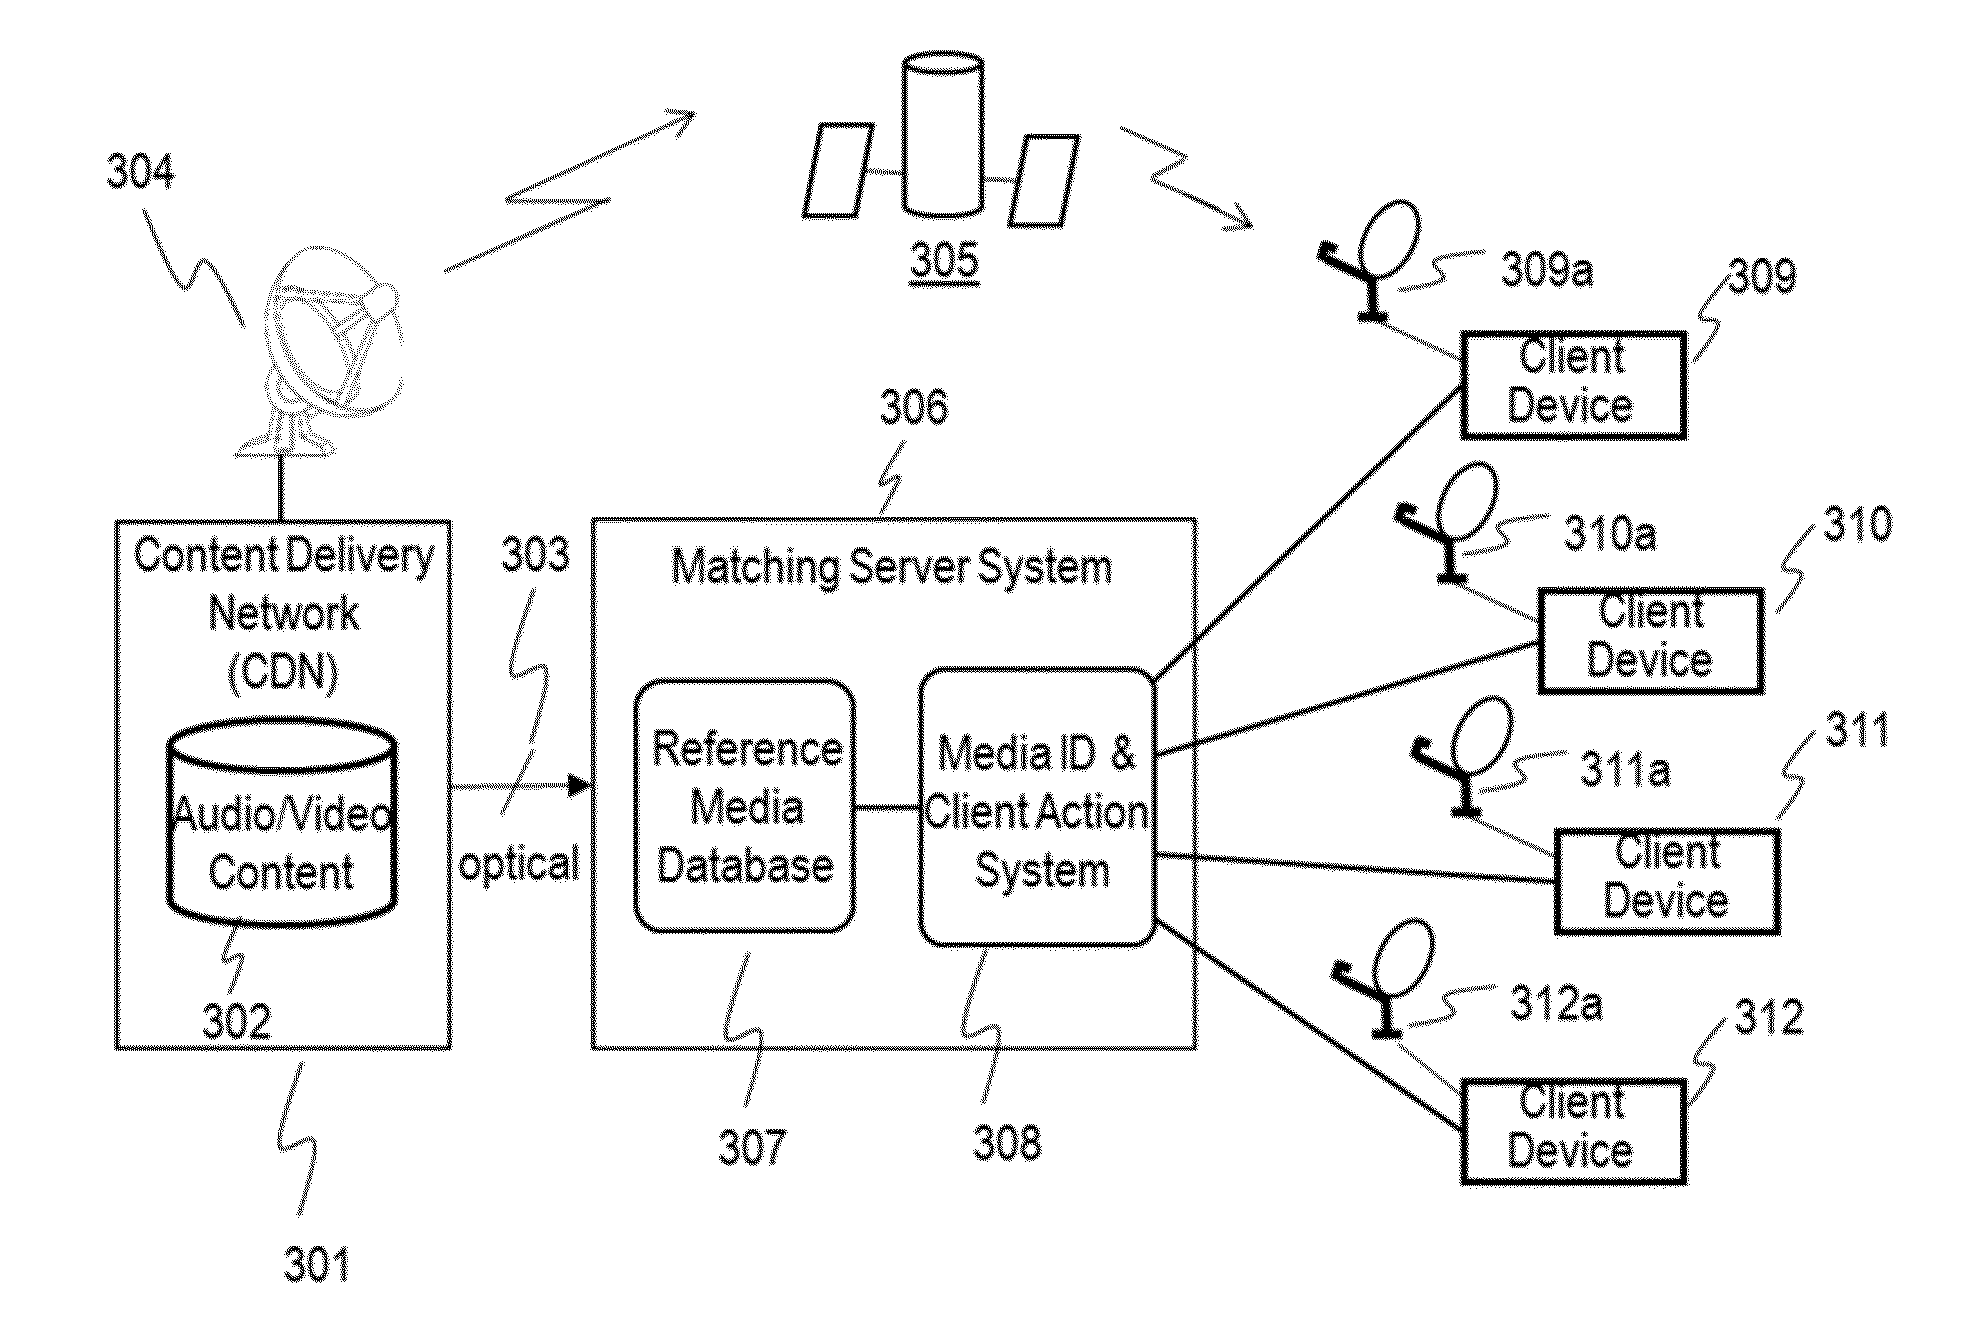 System and method for continuous media segment identification